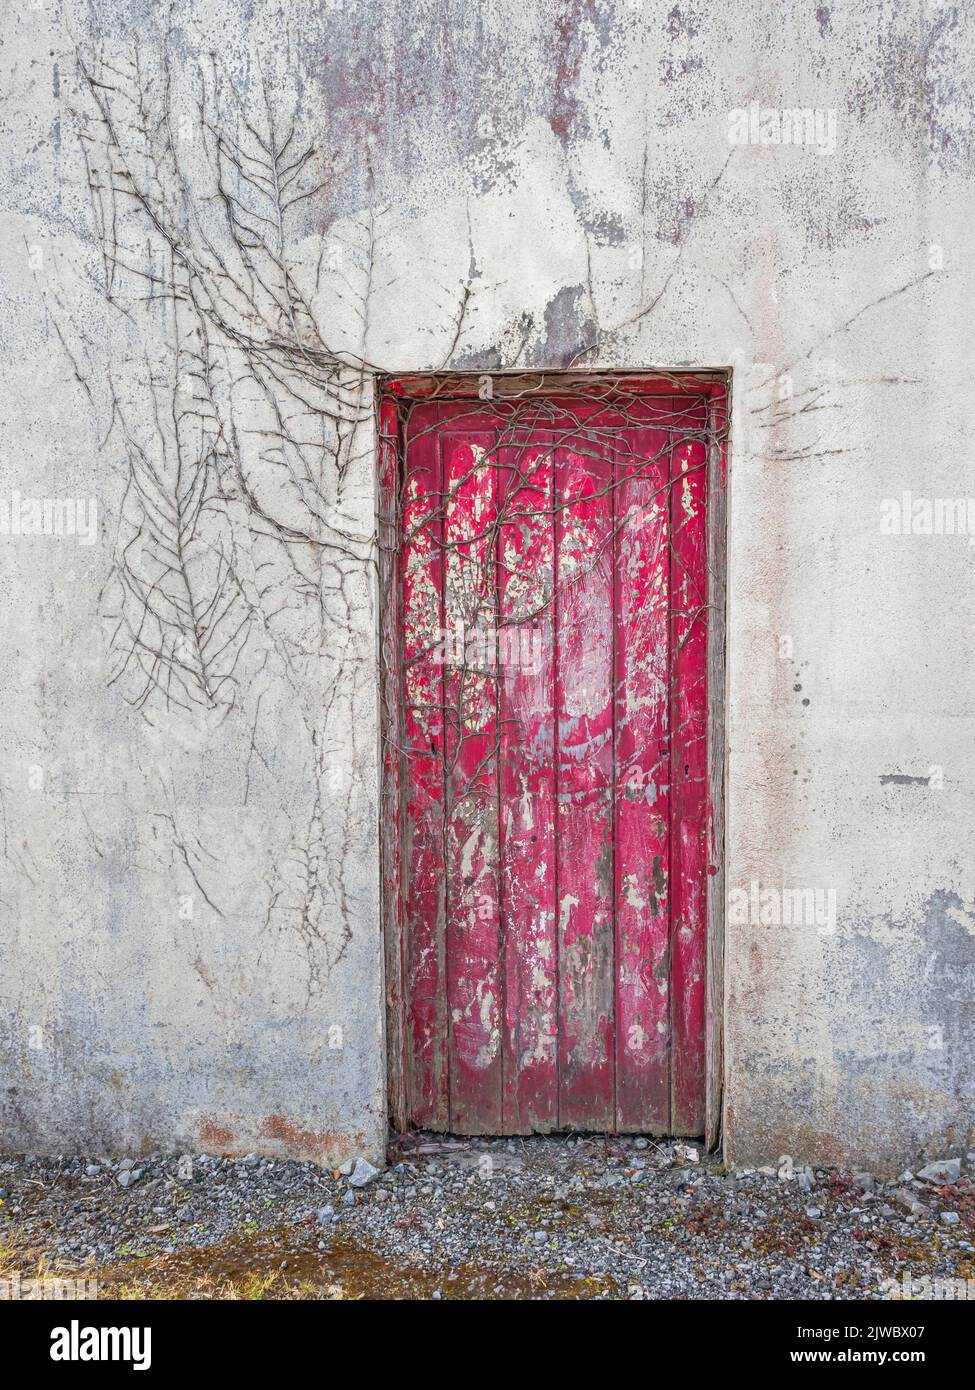 An old red door in the village of Cong, on the border of County Galway and County Mayo in Ireland. Stock Photo